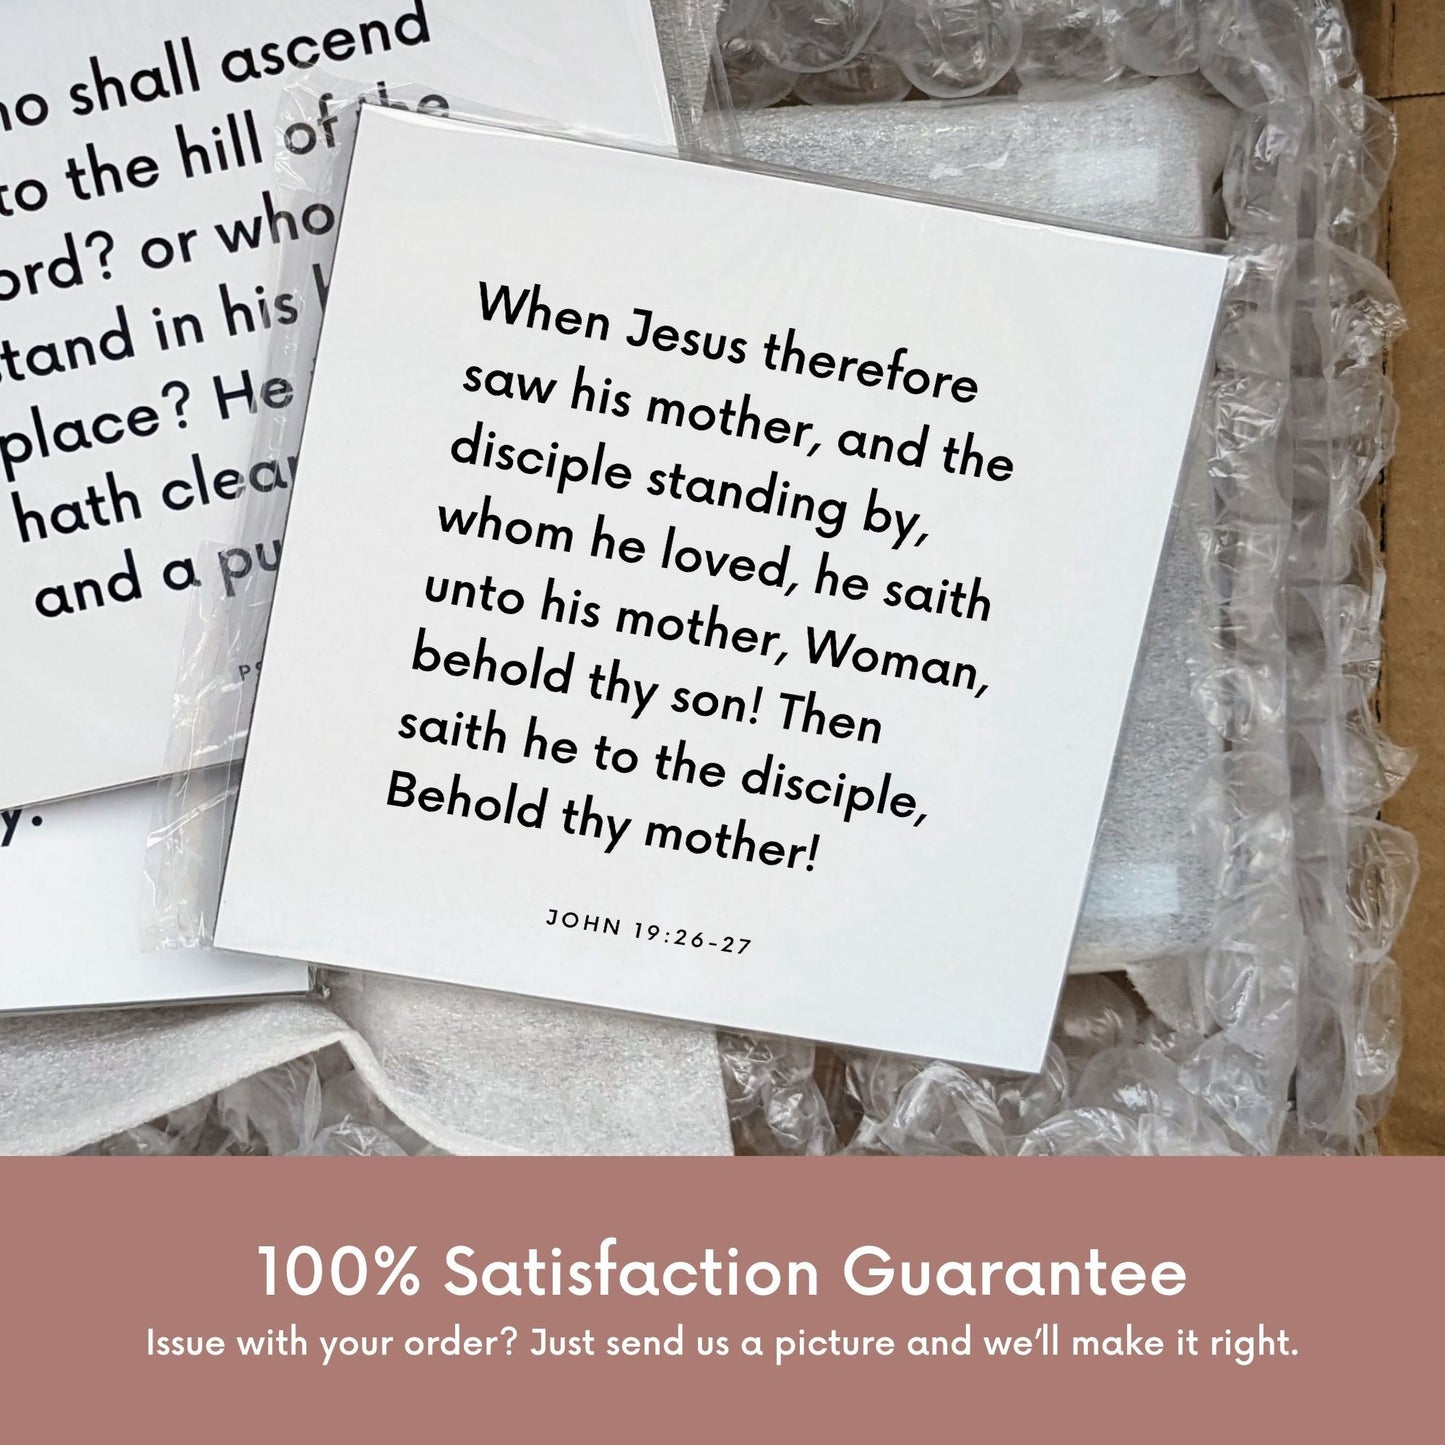 Shipping materials for scripture tile of John 19:26-27 - "When Jesus therefore saw his mother"